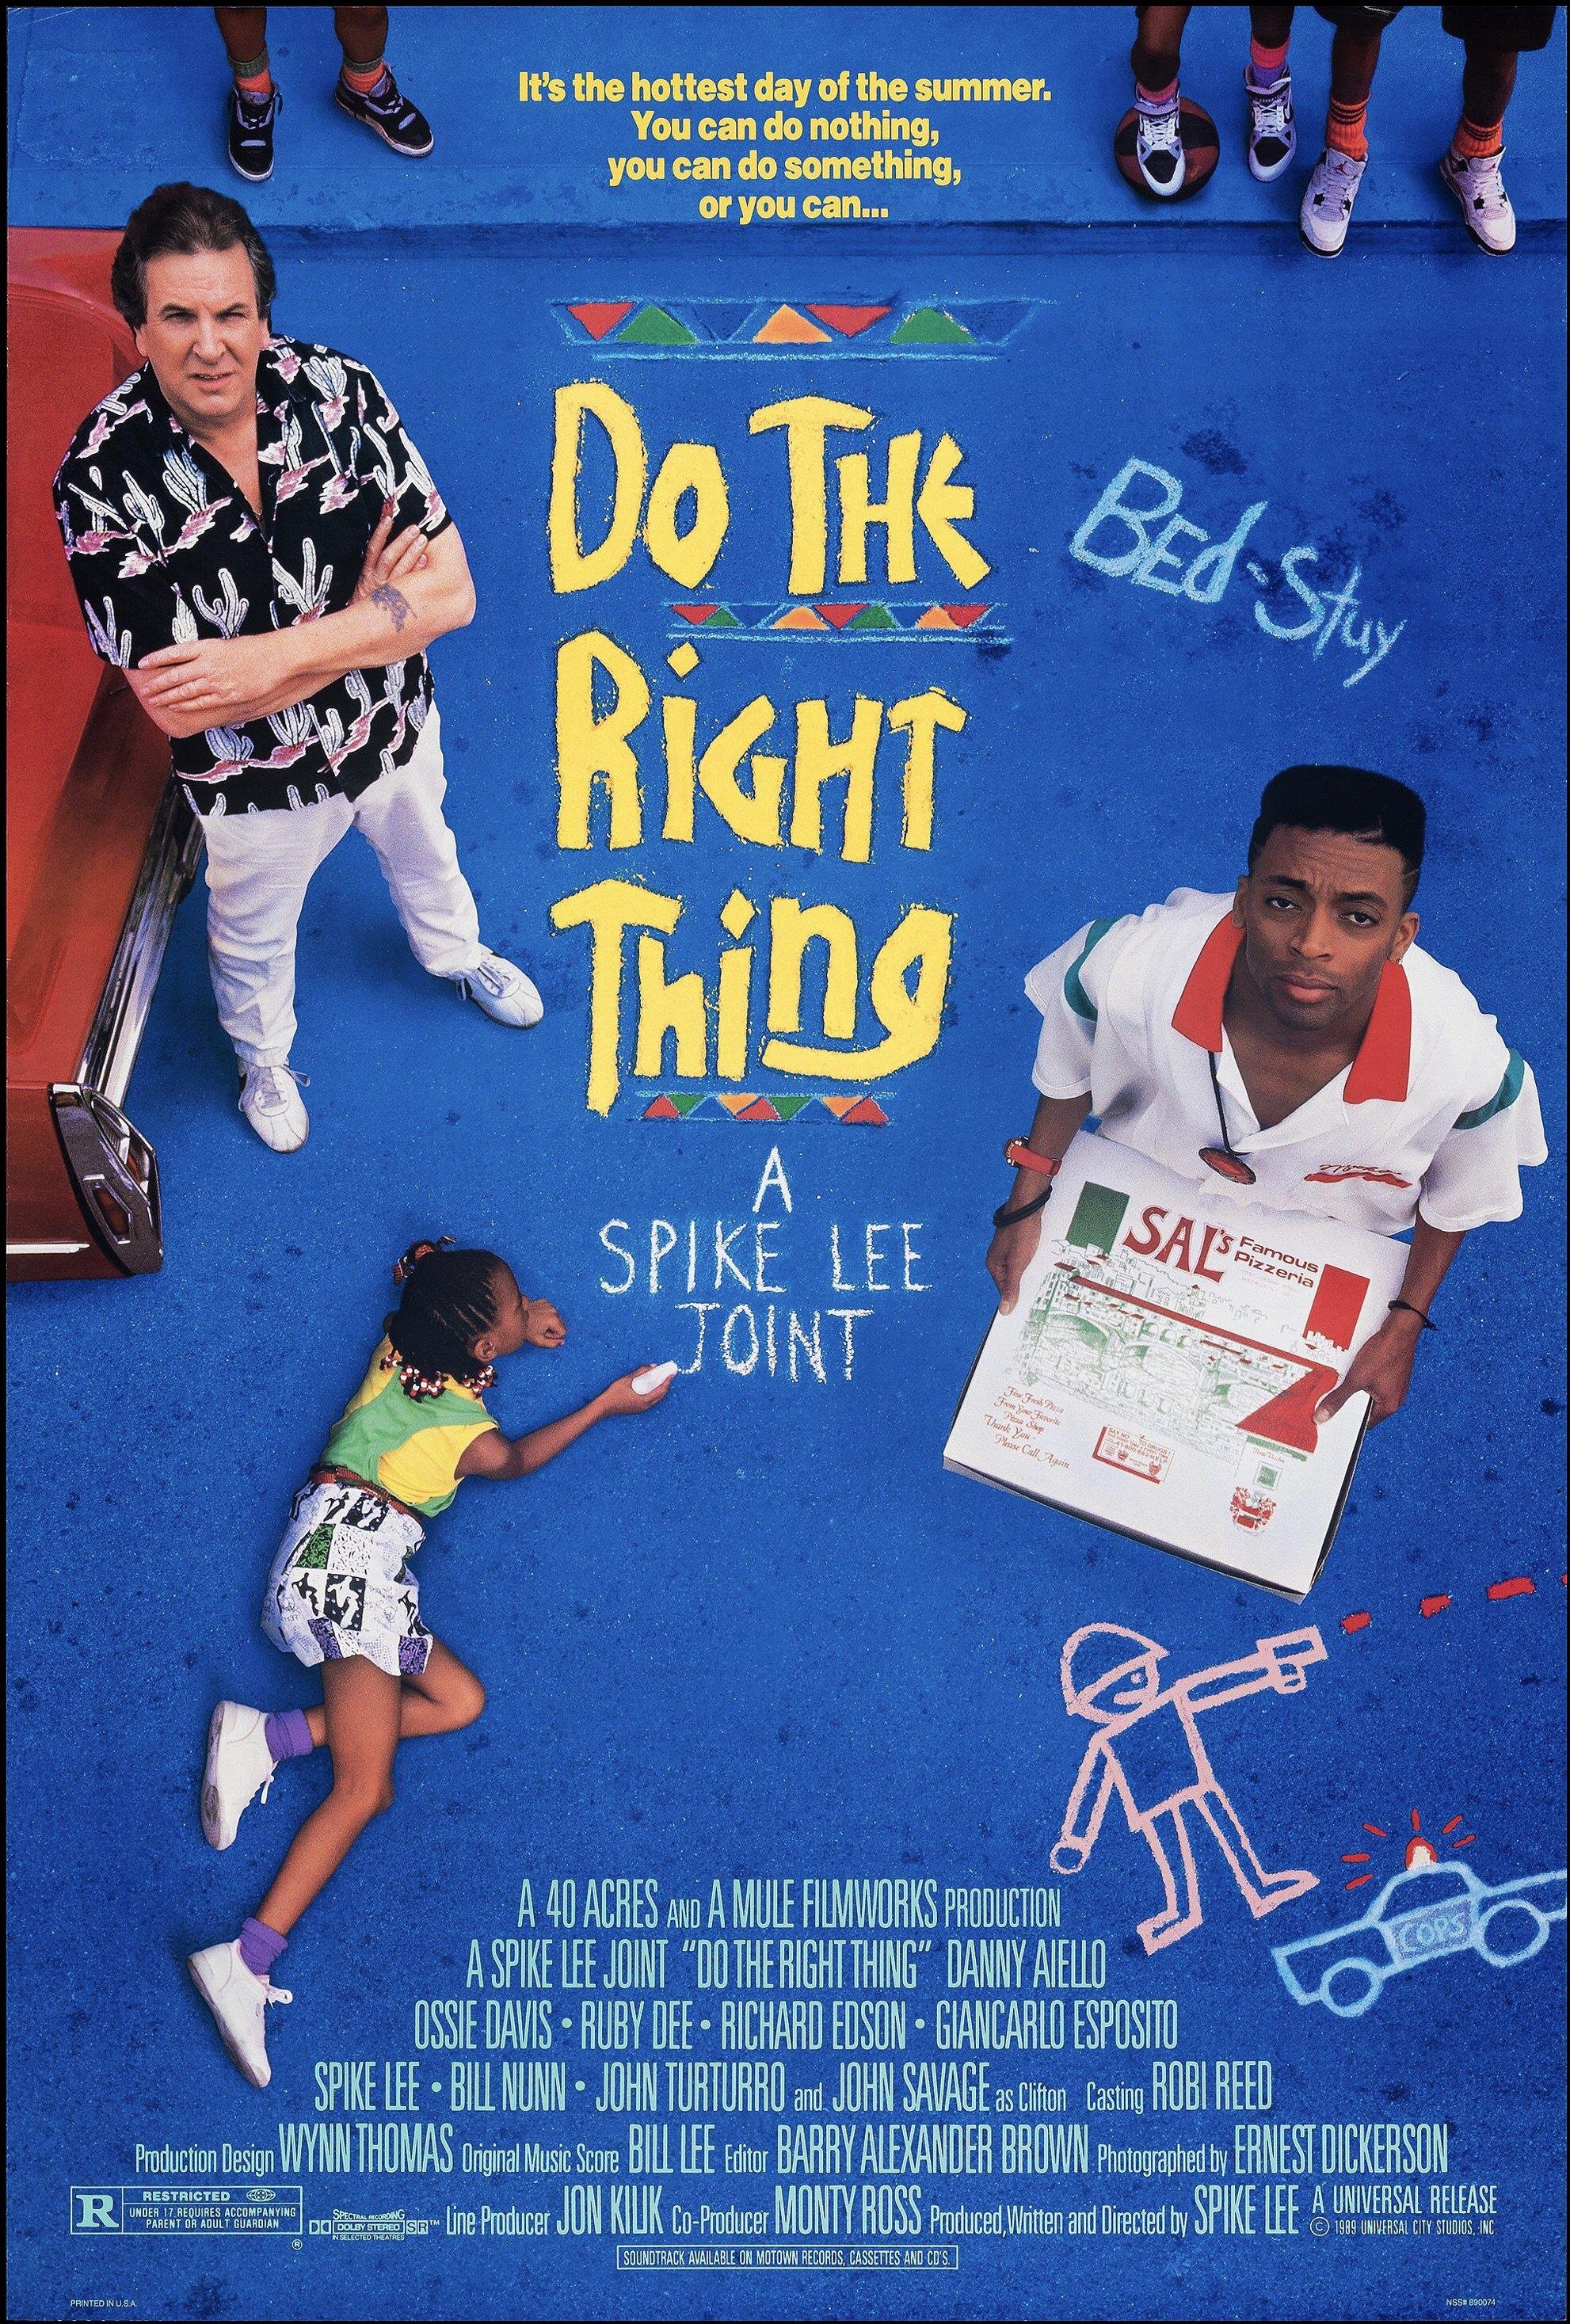 do-the-right-thing-vintage-movie-poster-original-1-sheet-27x41-1641.jpg